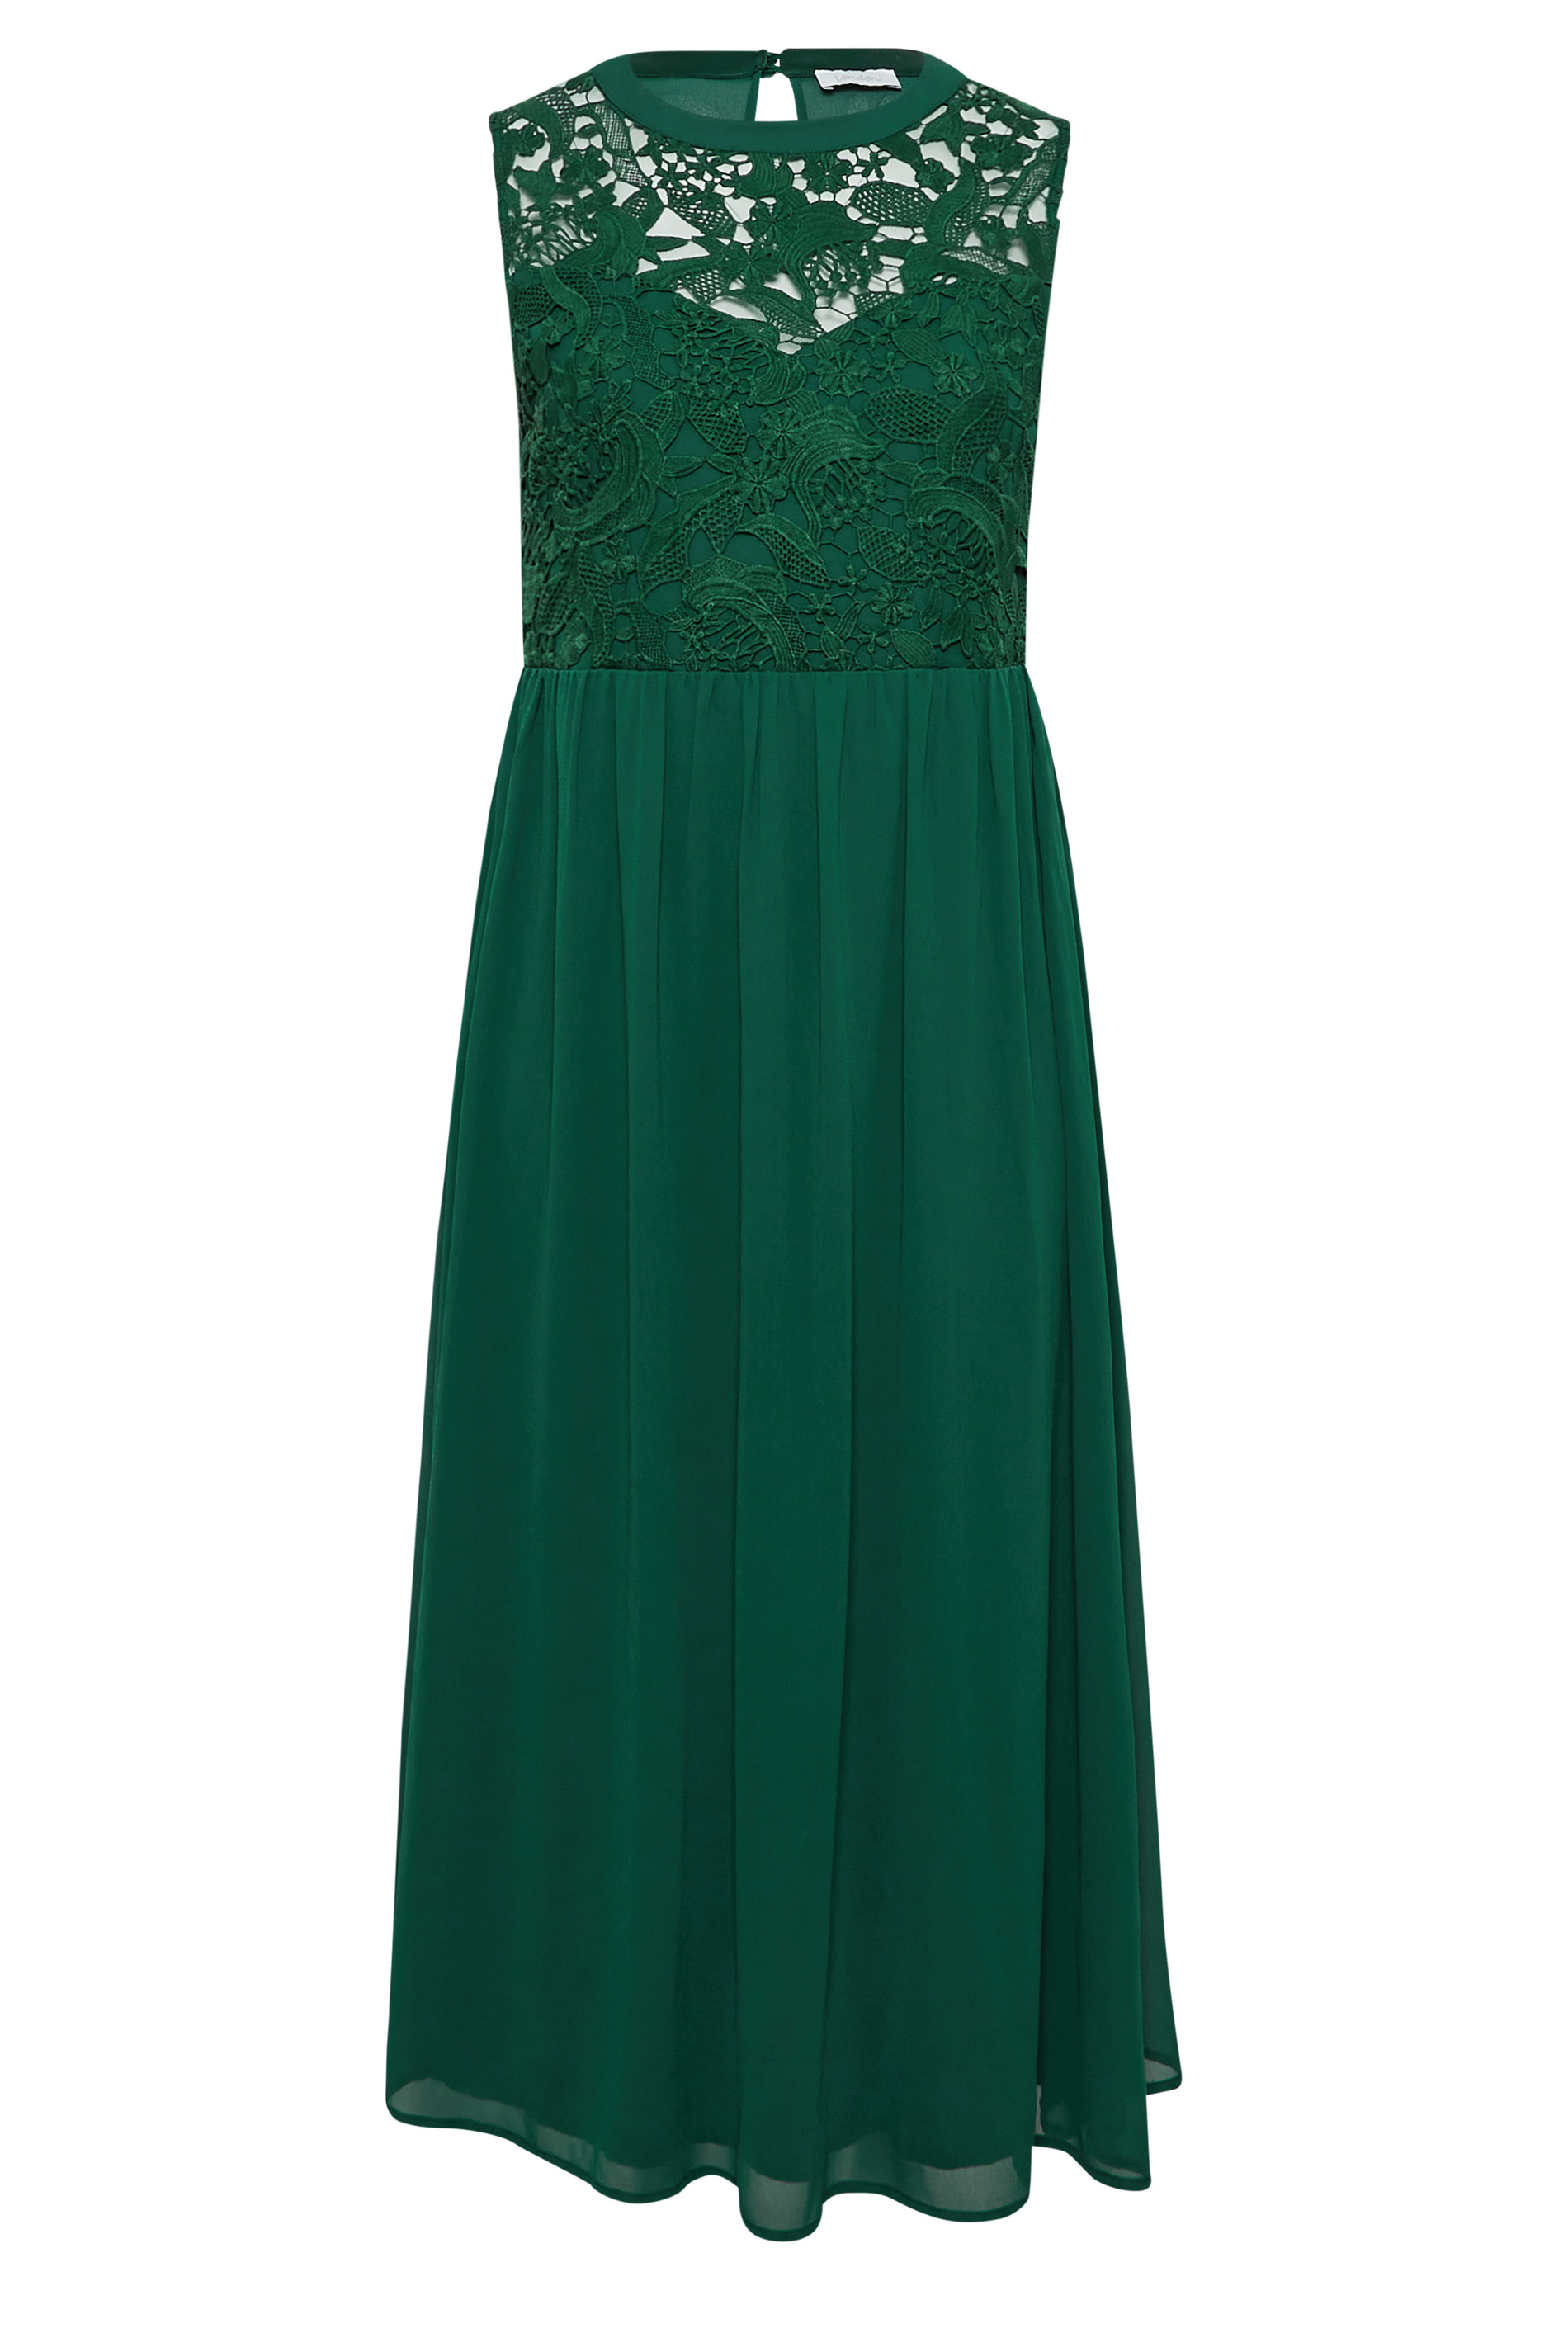 Plus Size YOURS LONDON Curve Forest Green Lace Front Chiffon Maxi